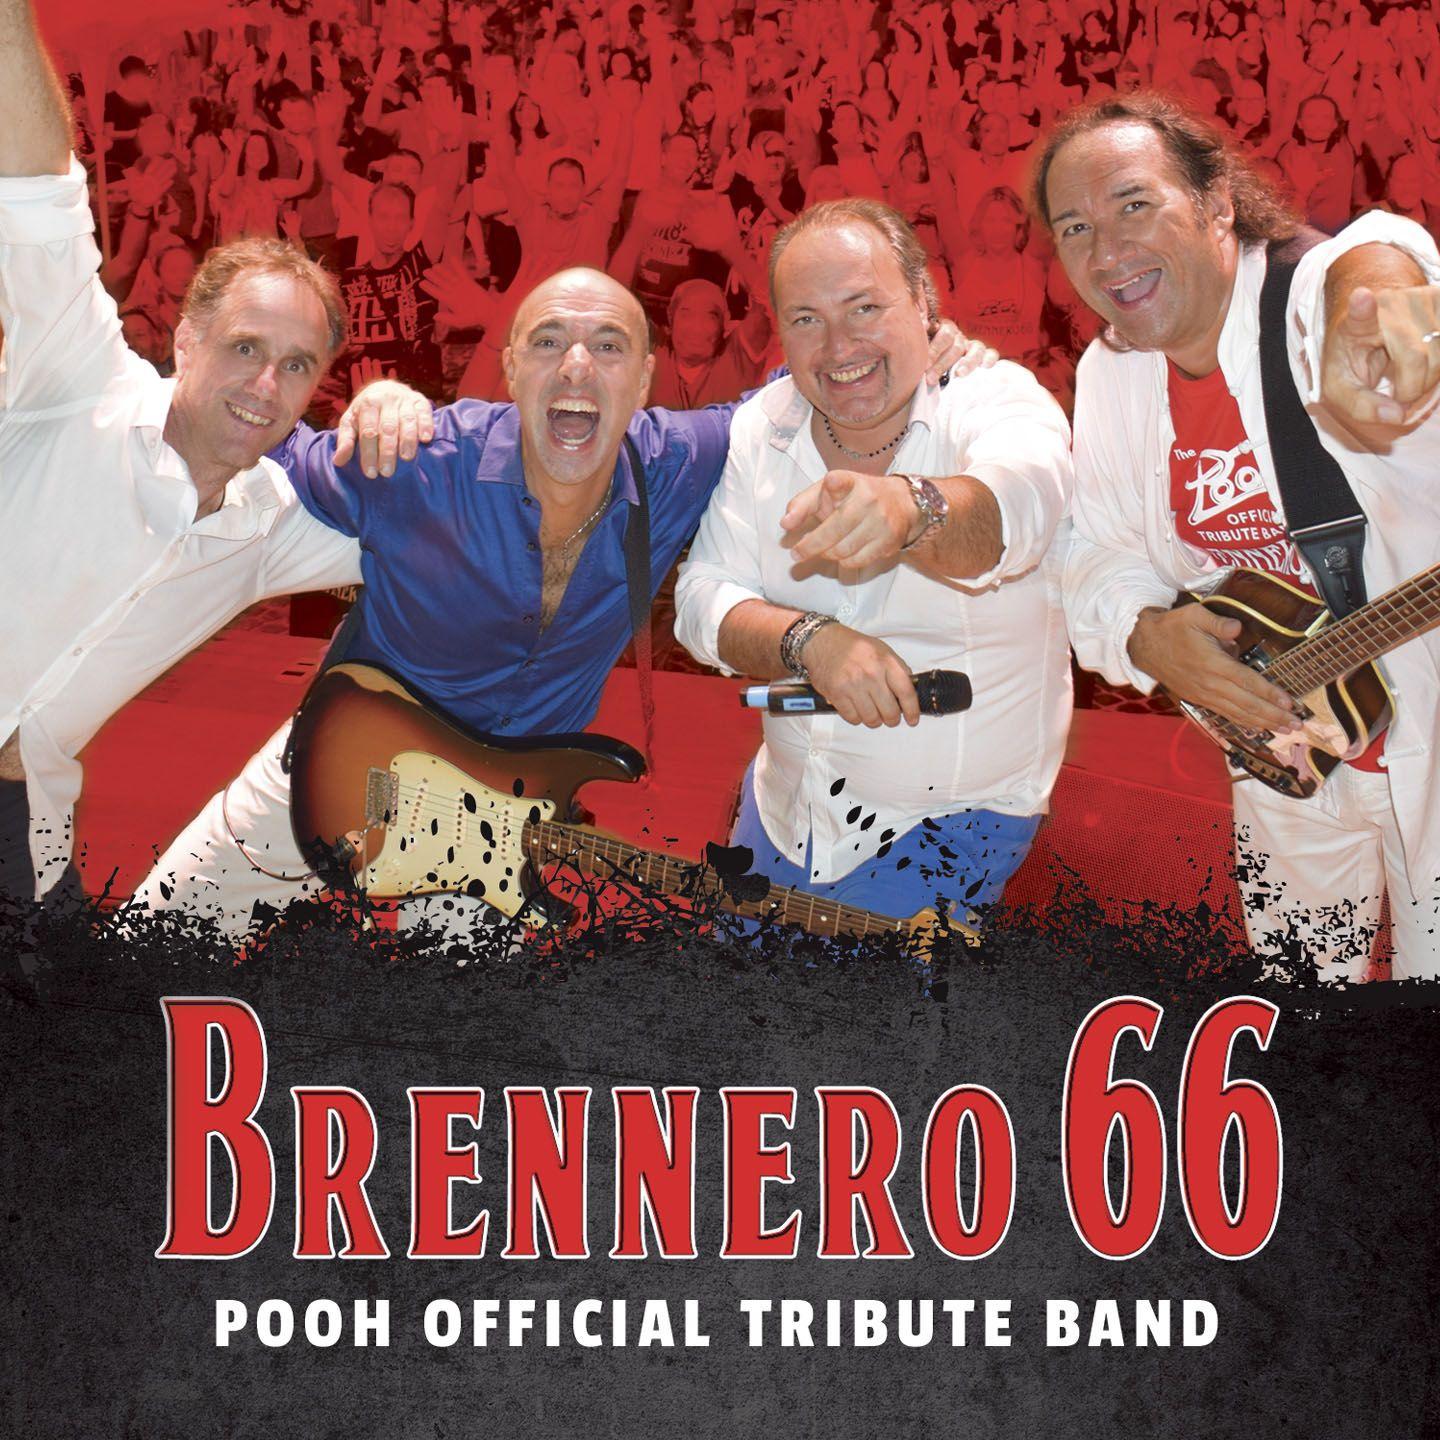 BRENNERO 66 – POOH OFFICIAL TRIBUTE BAND